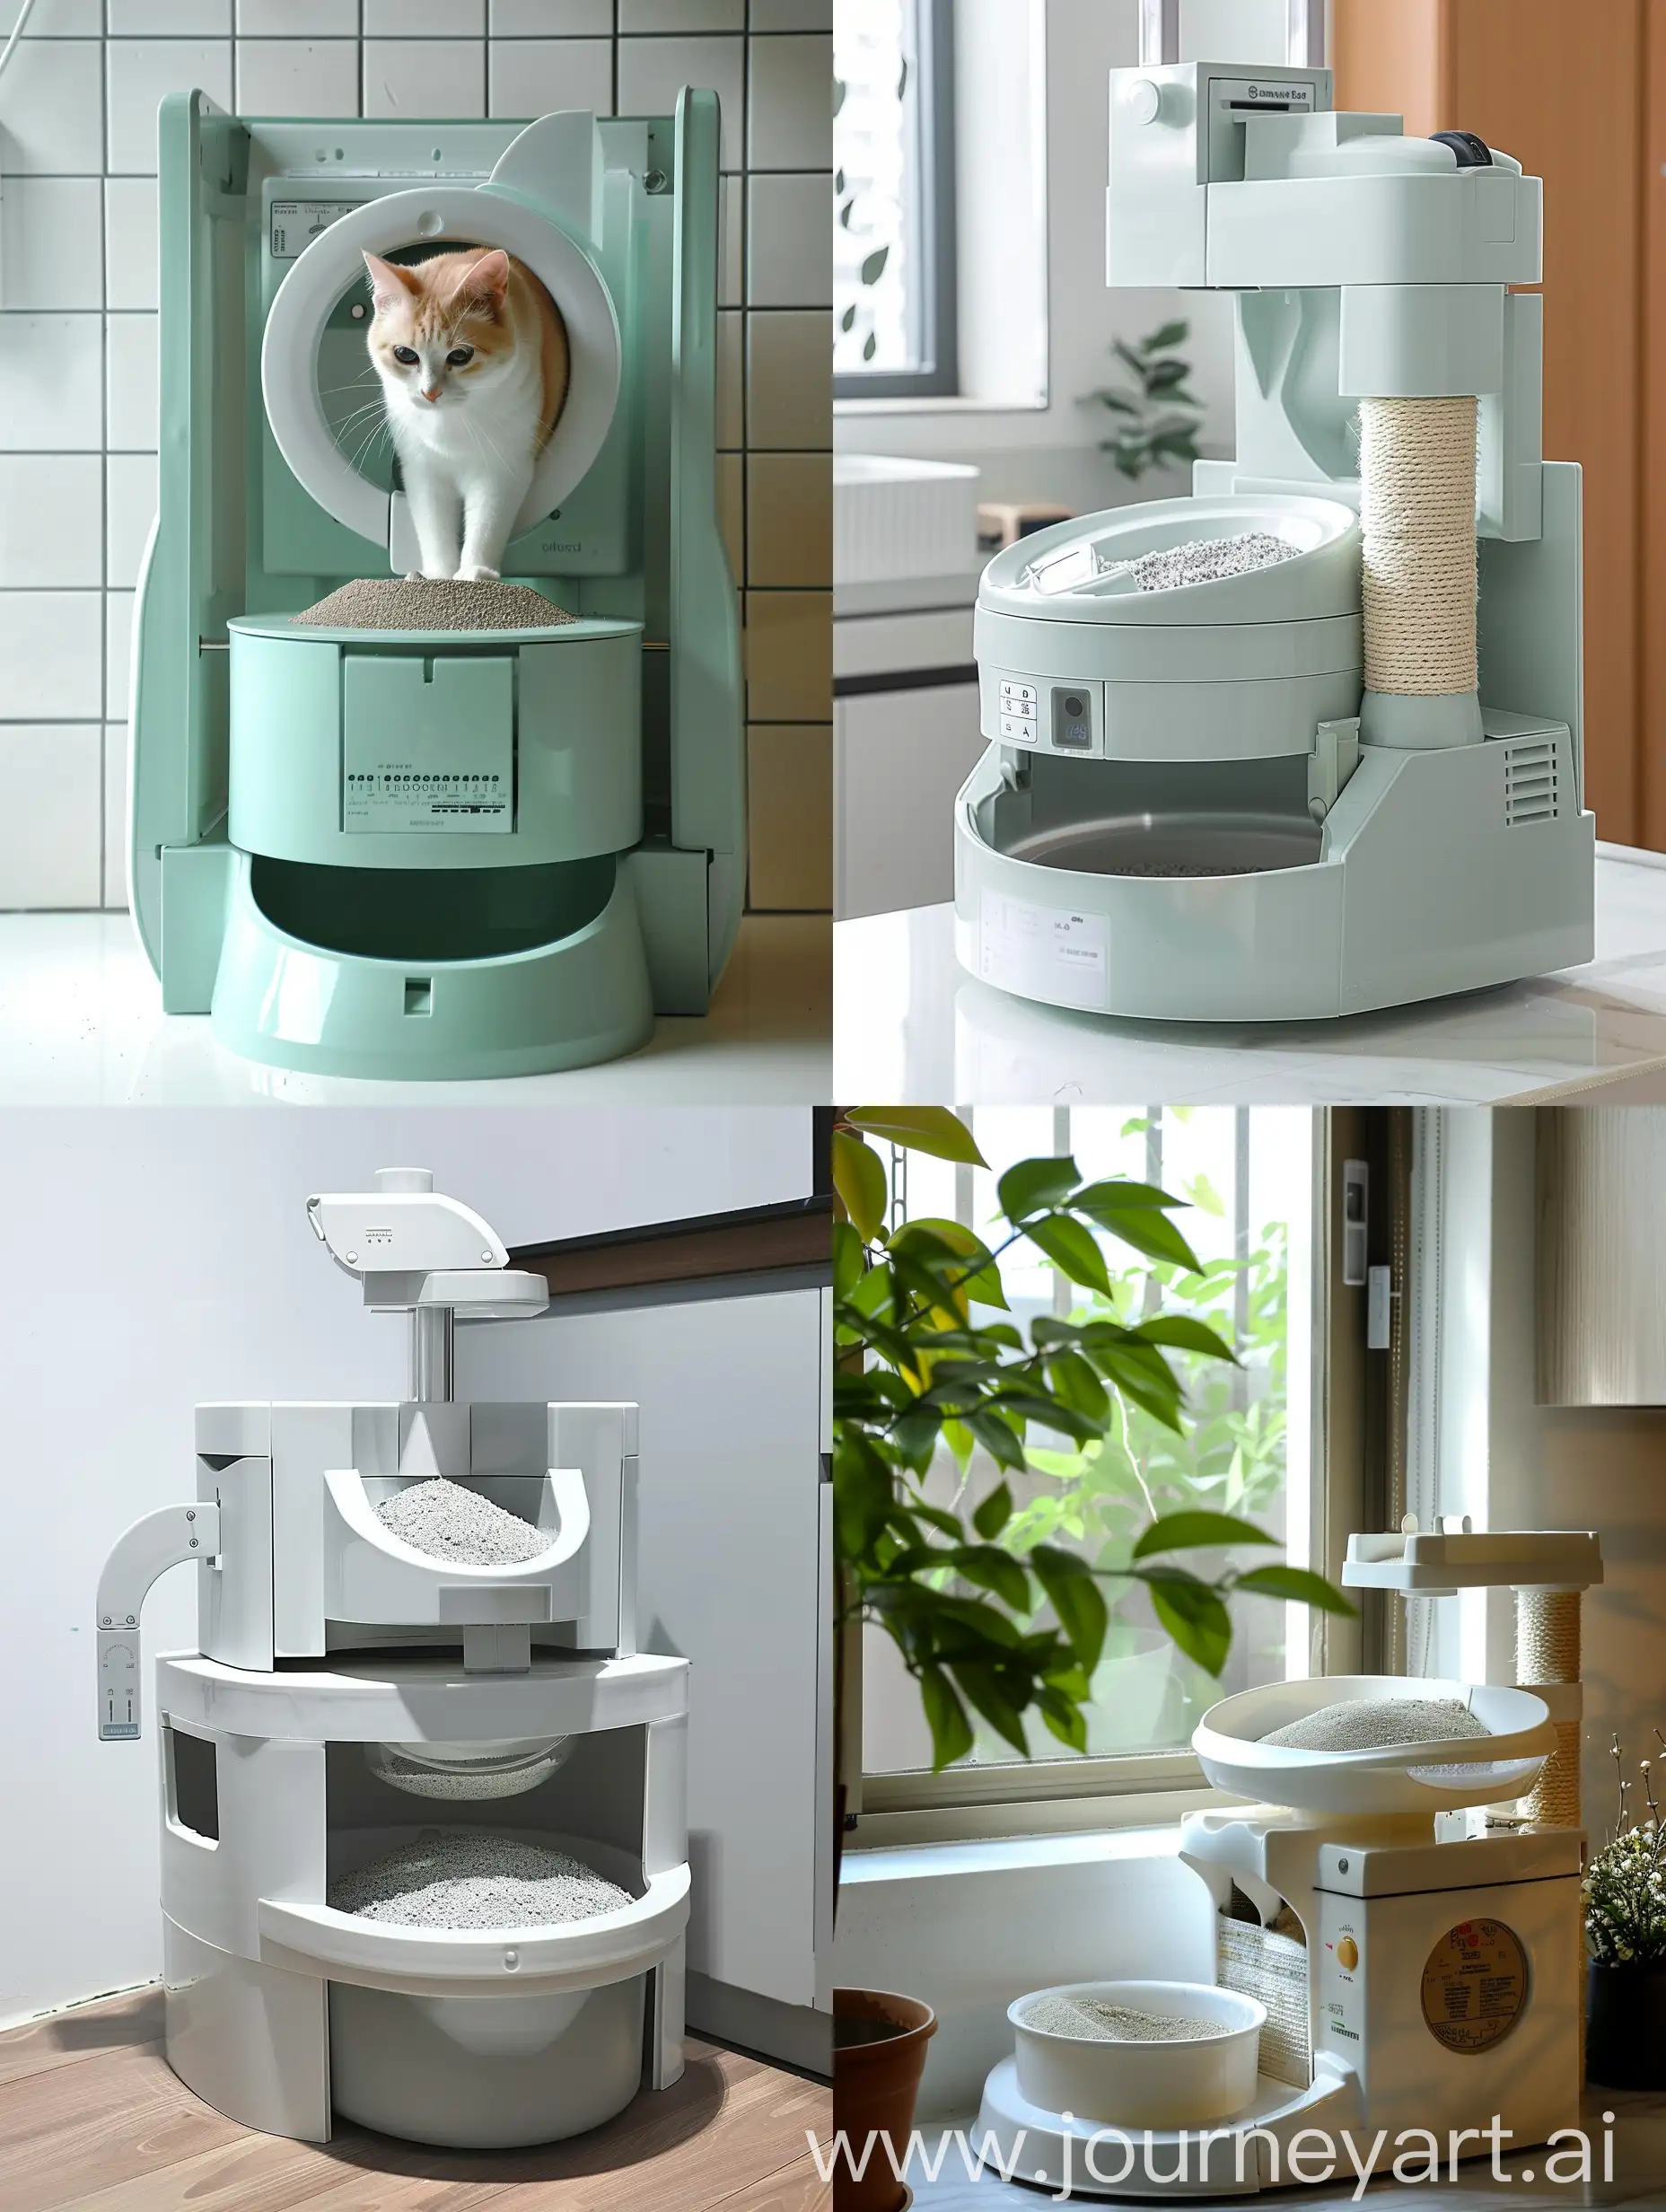 Create a photo for semi-automatic cat litter box. This litter box looks exactly the same as fully automatic cat litter box with one addition i.e. there is lever that when rotated manually 90 degree it rotates the litter box inside. There should be circular type object on top where we put cat litter and below should be a bin where the cat waste is dumped by the upper part. The lever can be either on left or right side.